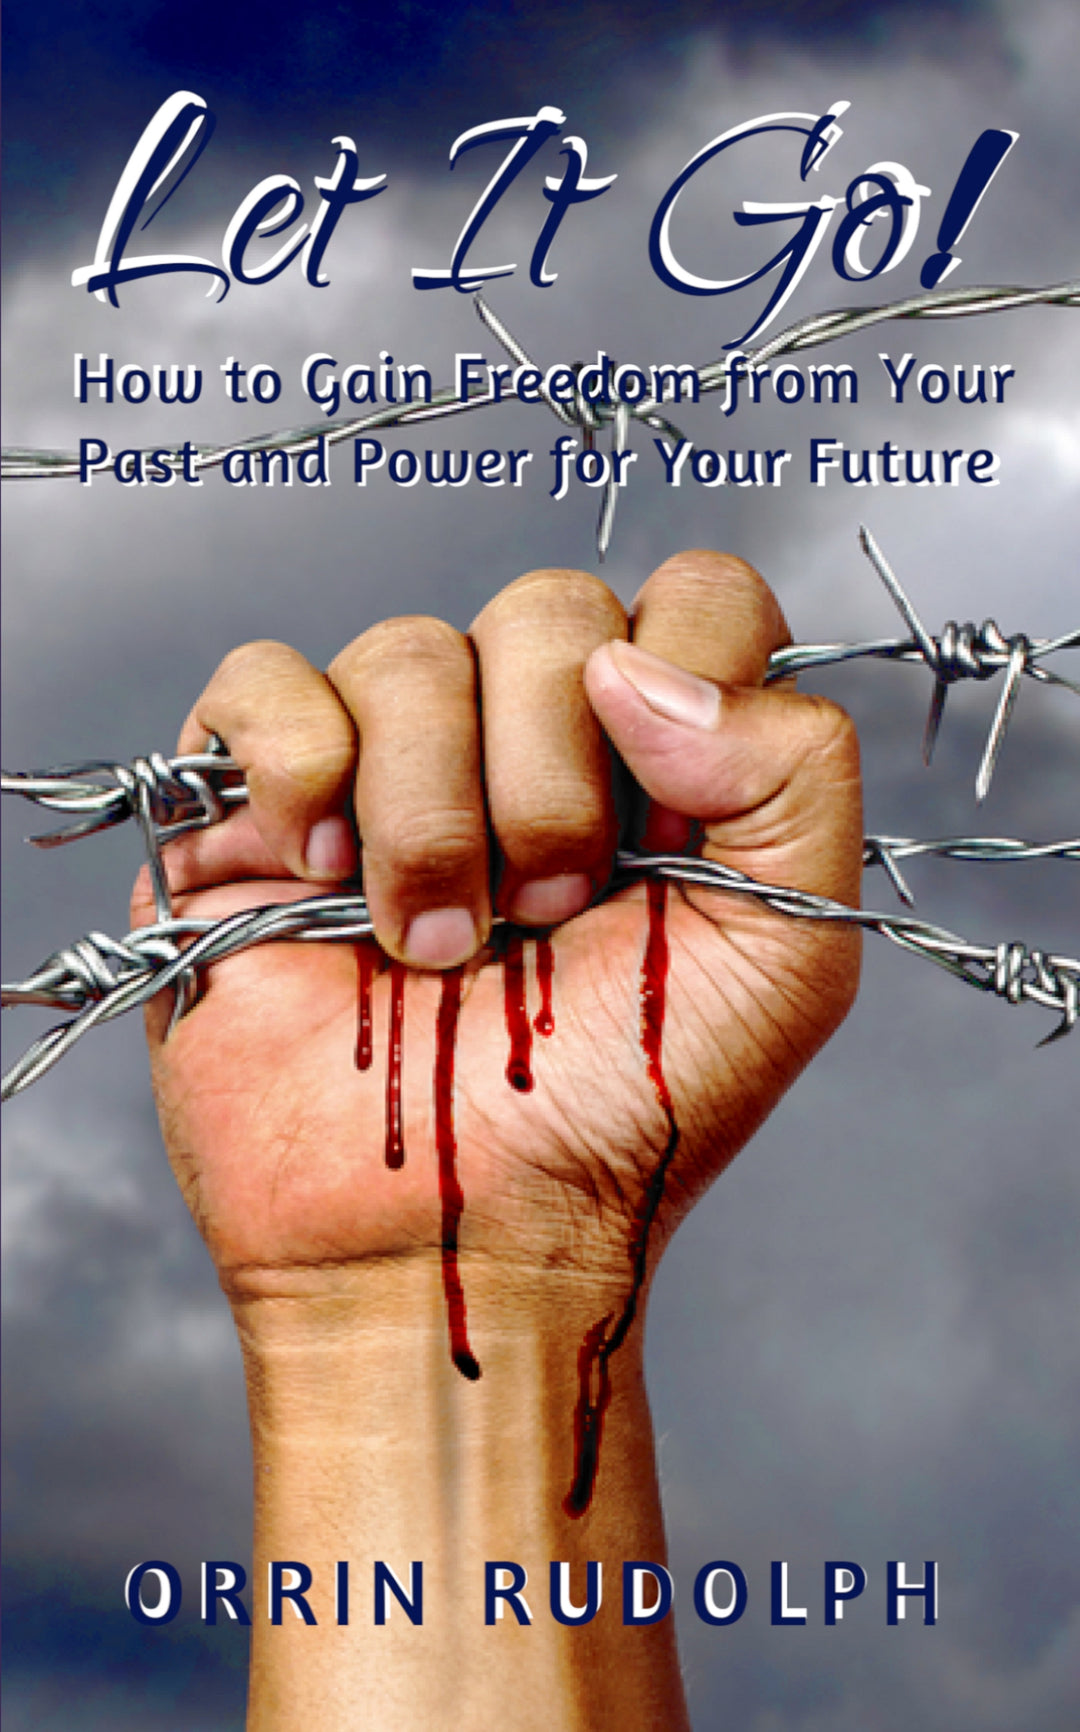 Let it Go! How to Gain Freedom from Your Past and Power for your Future